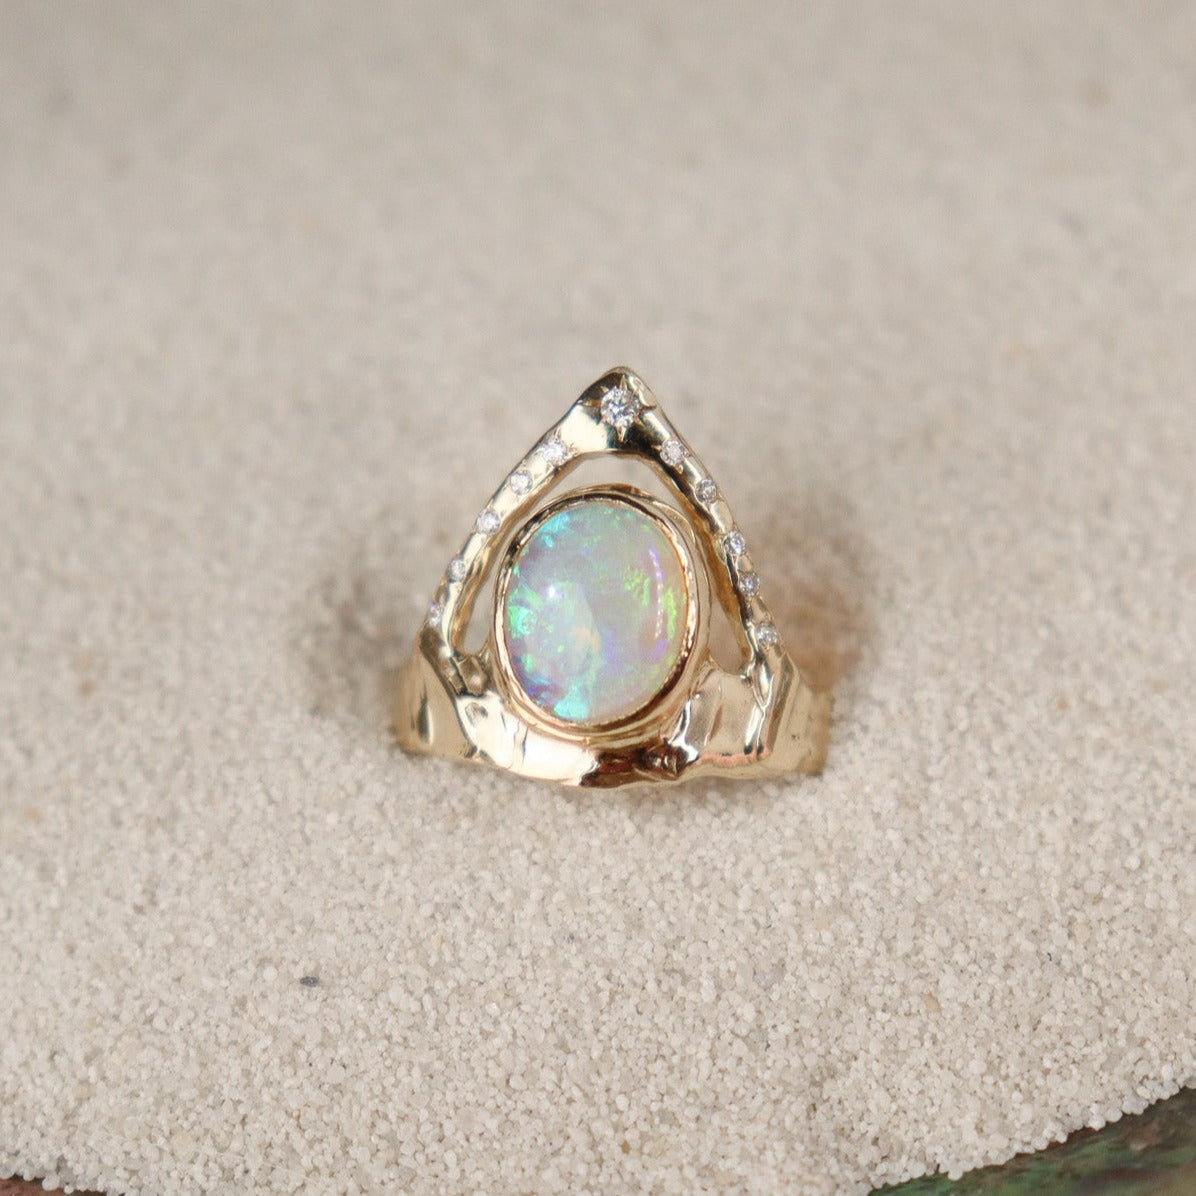 Stunning ring featuring a bezel-set opal on a wide, organically shaped band, adorned with a crown-like V-shaped band encircling the opal and embellished with glistening diamond accents